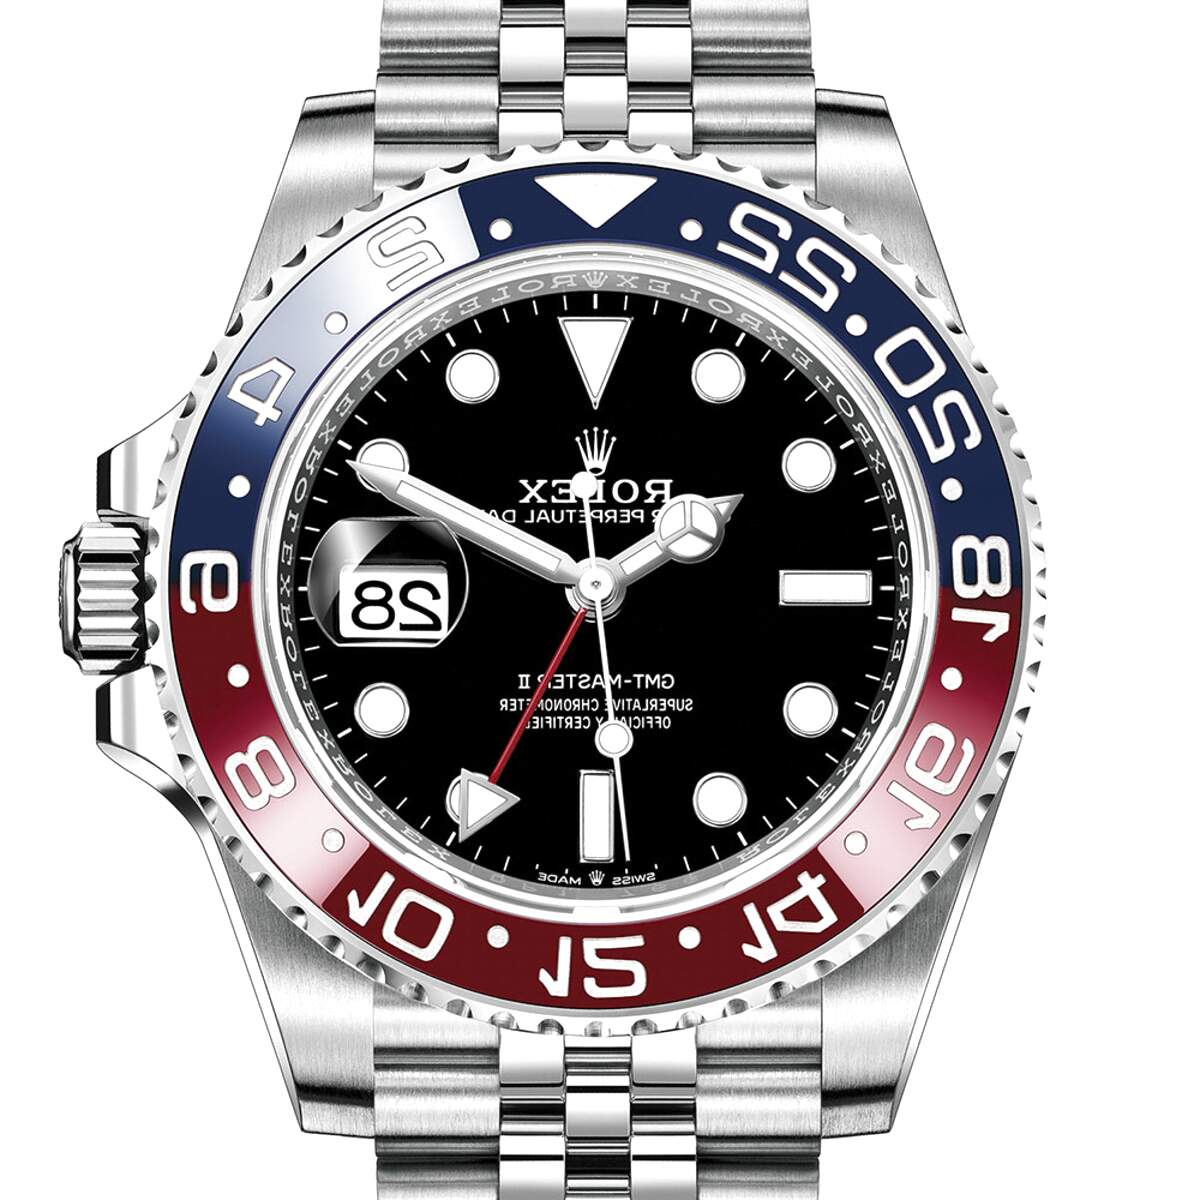 Rolex gmt for sale uk